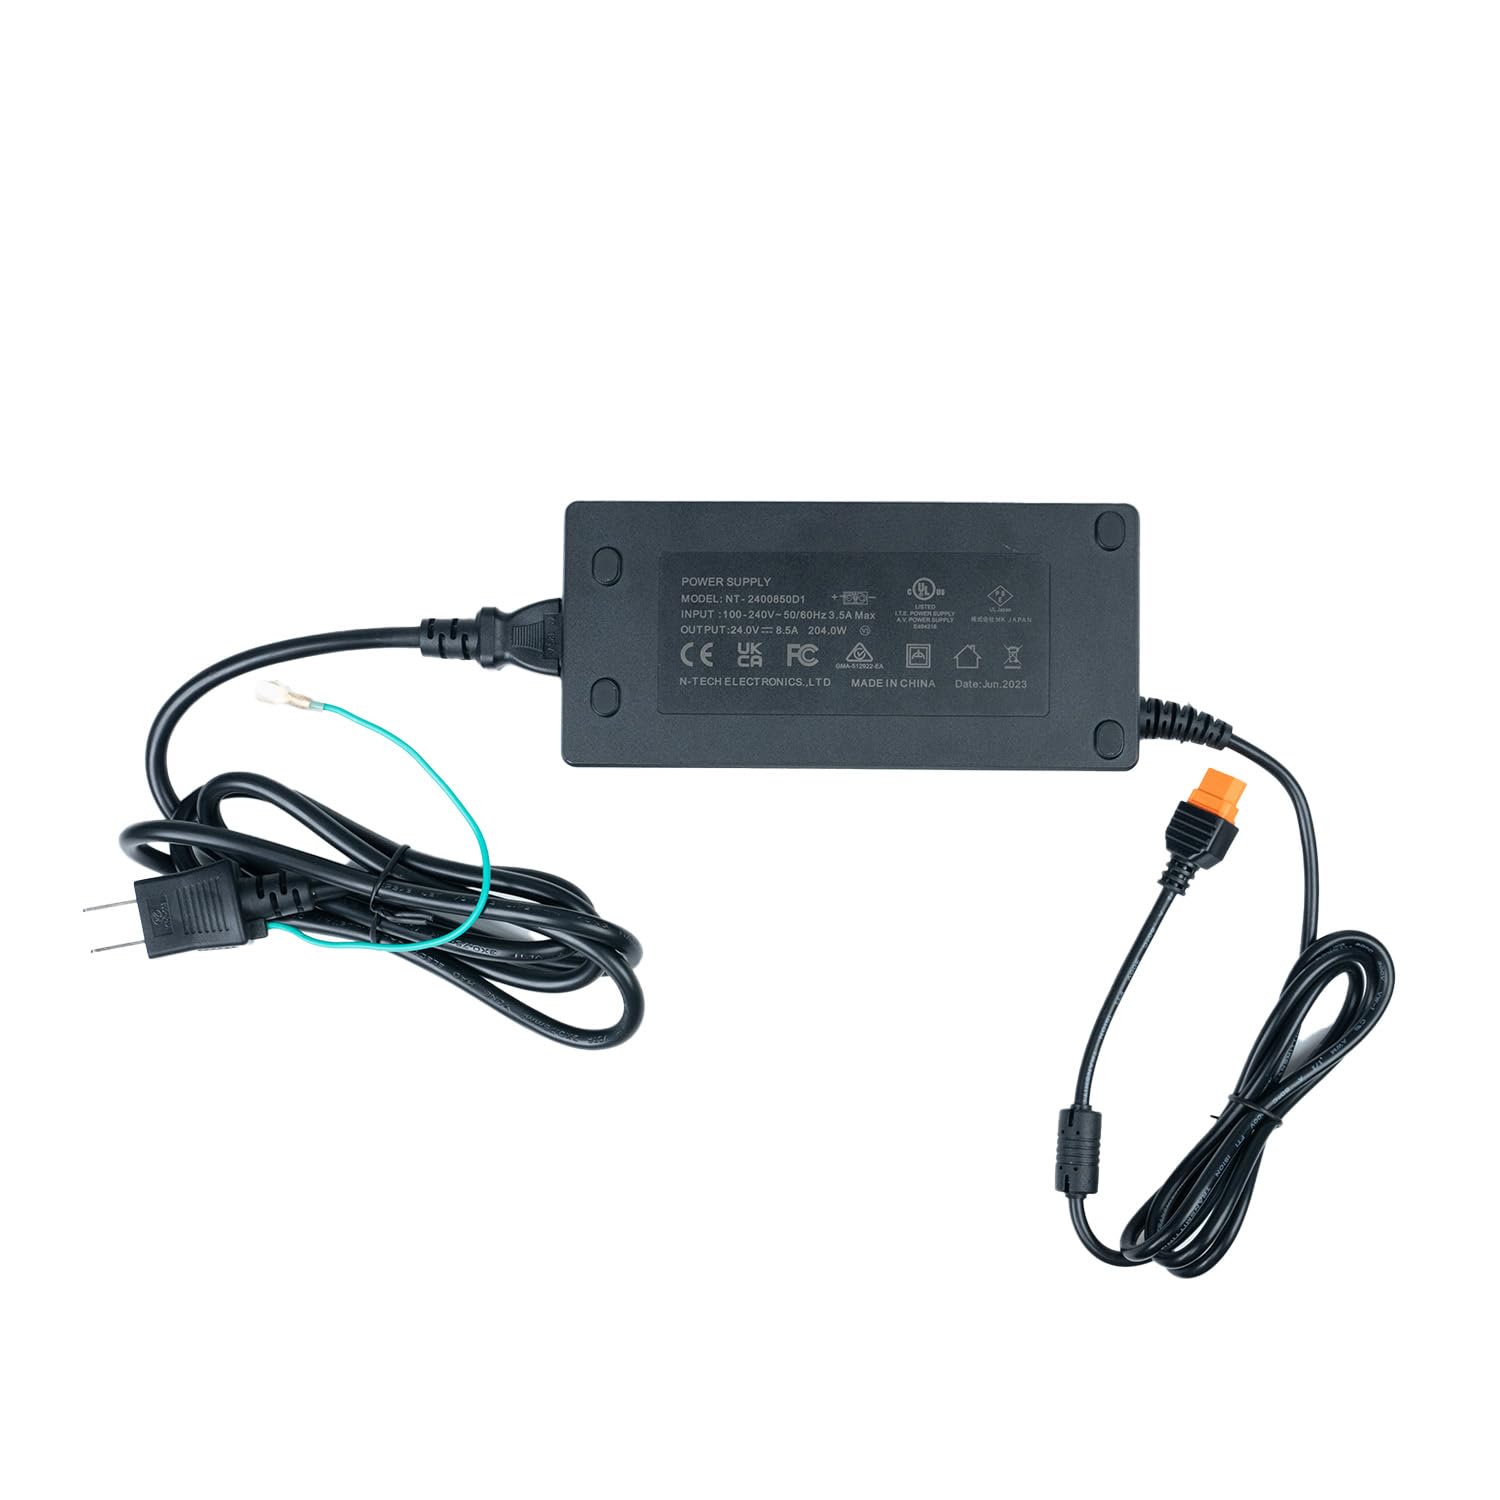 FFpower B2000  200W AC Adapter for Charging